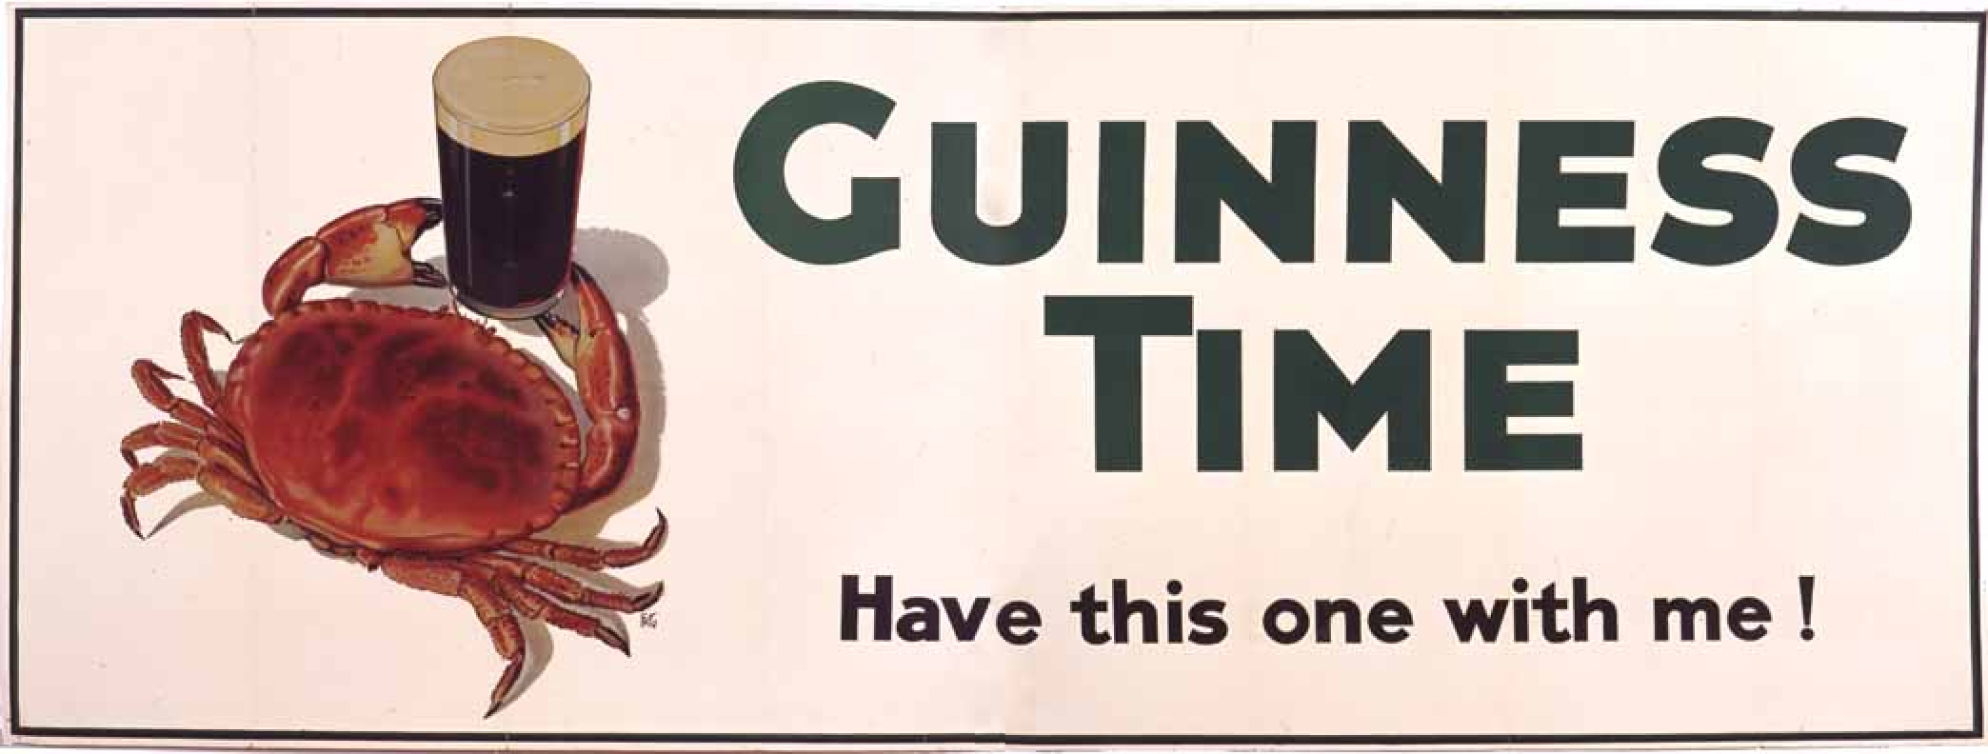 ‘Guinness Time – Have this one on me!’ print of crab holding a pint, 1935.